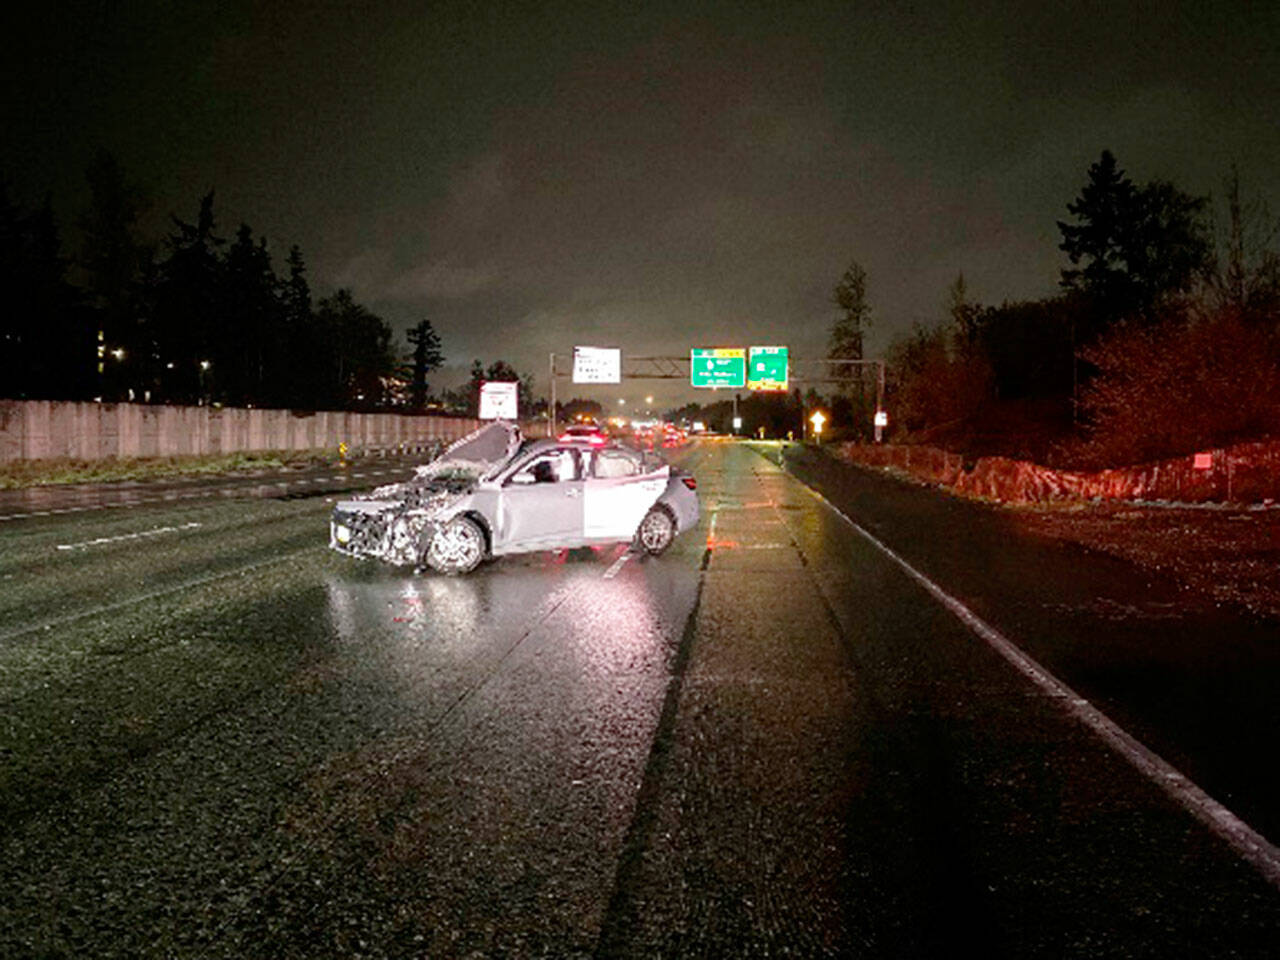 Washington State Patrol are looking for witnesses that might have seen this Nissan Sentra collide with another vehicle on Monday night, April 8 along Interstate 5 in Kent near State Route 516. The driver fled the scene on foot. COURTESY PHOTO, Washington State Patrol